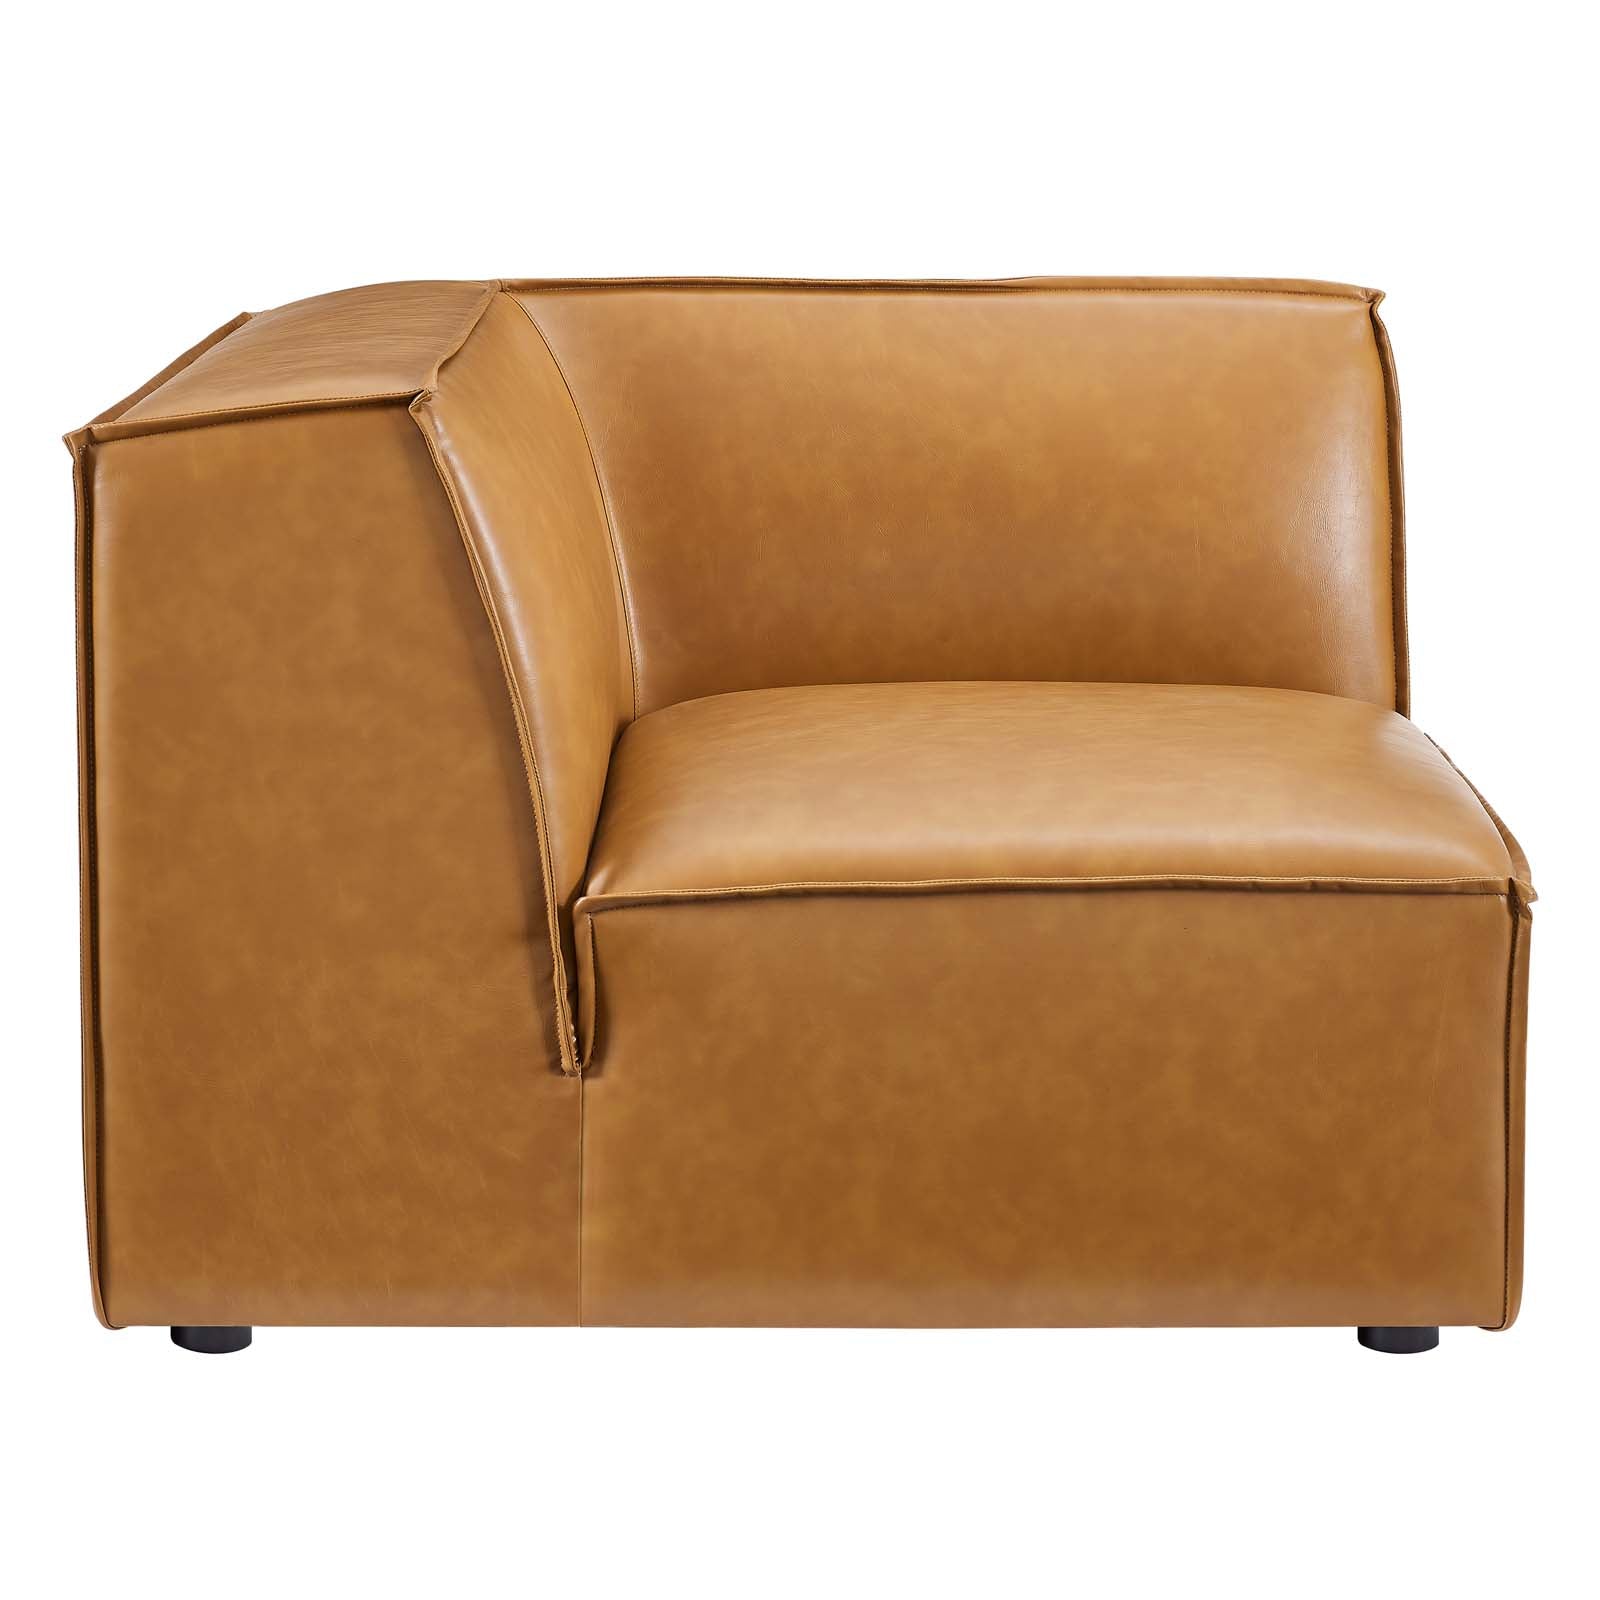 Modway Accent Chairs - Restore Vegan Leather Sectional Sofa Corner Chair Tan